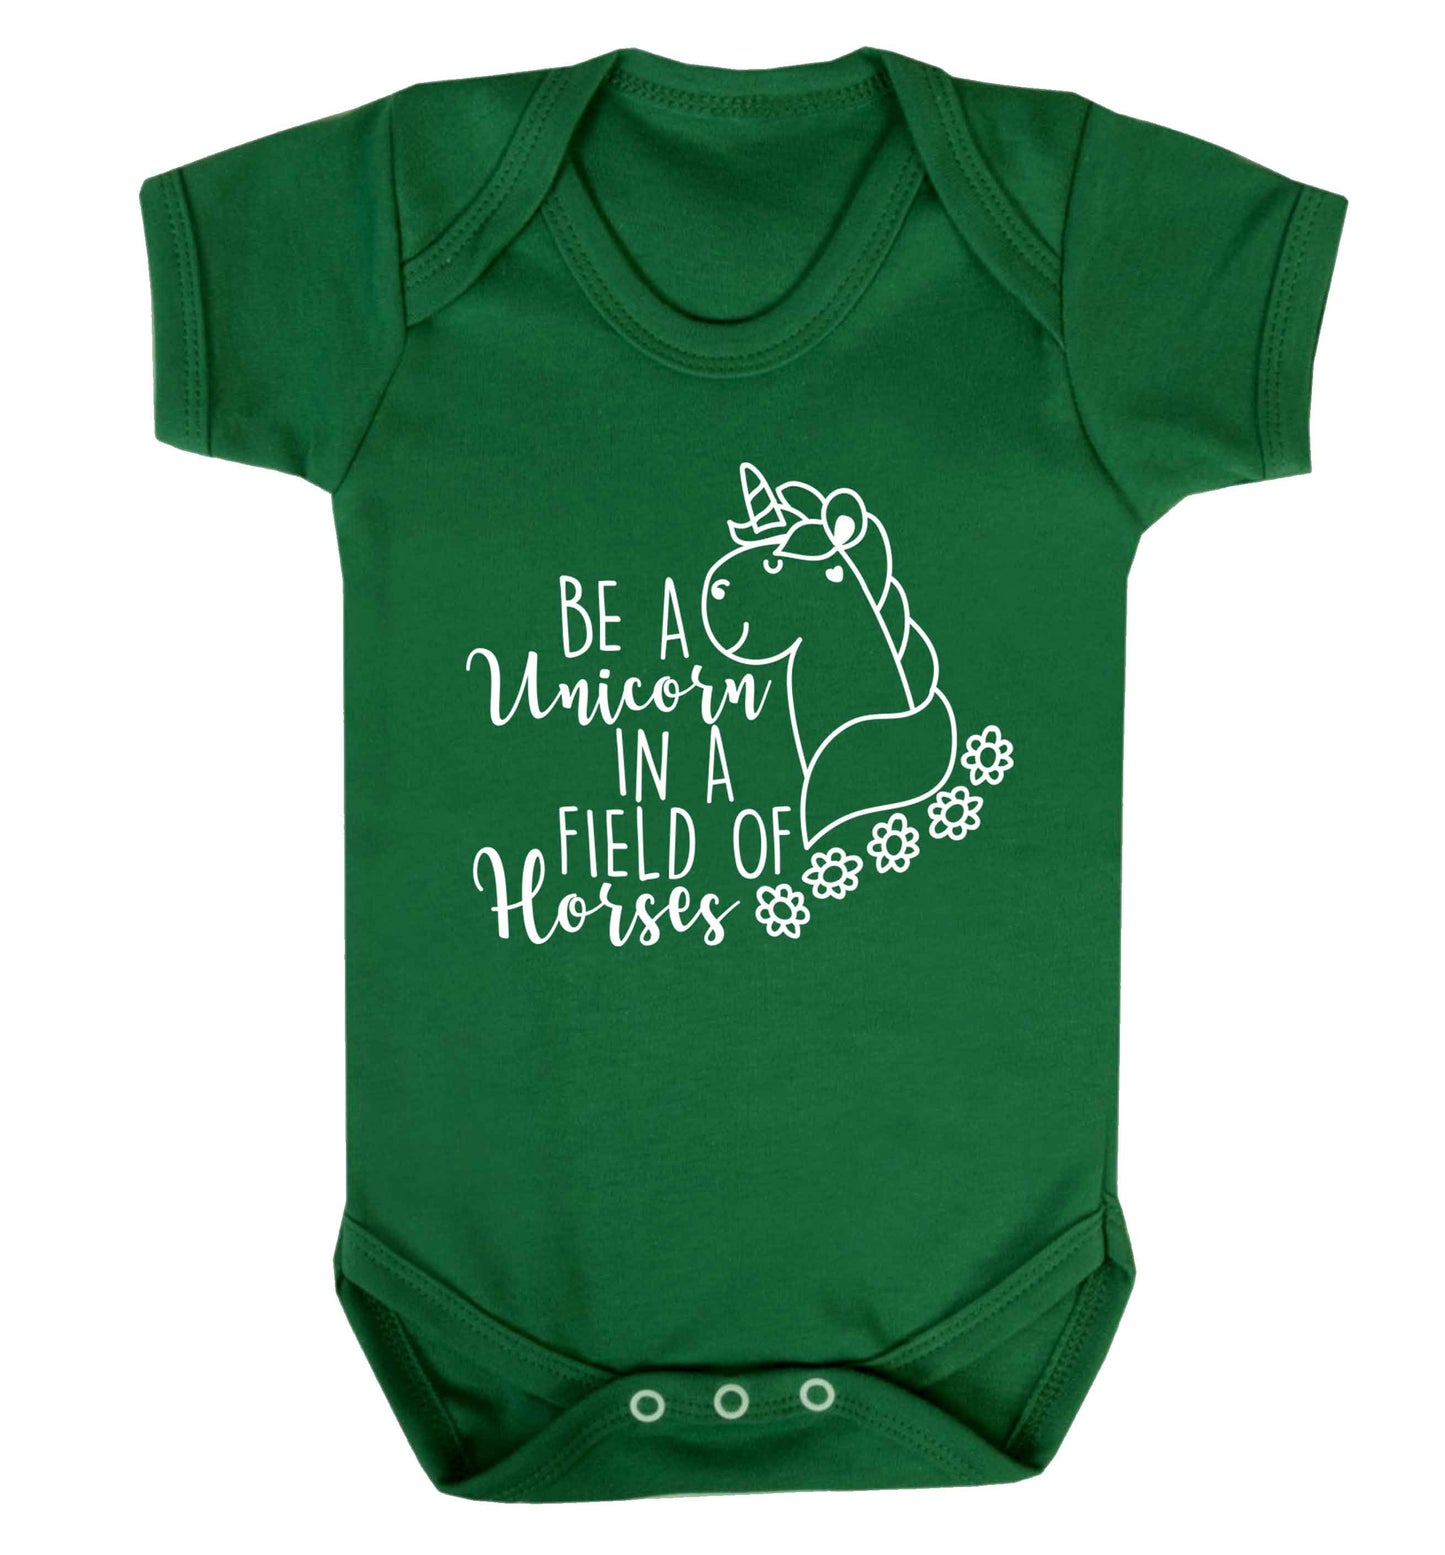 Be a unicorn in a field of horses Baby Vest green 18-24 months